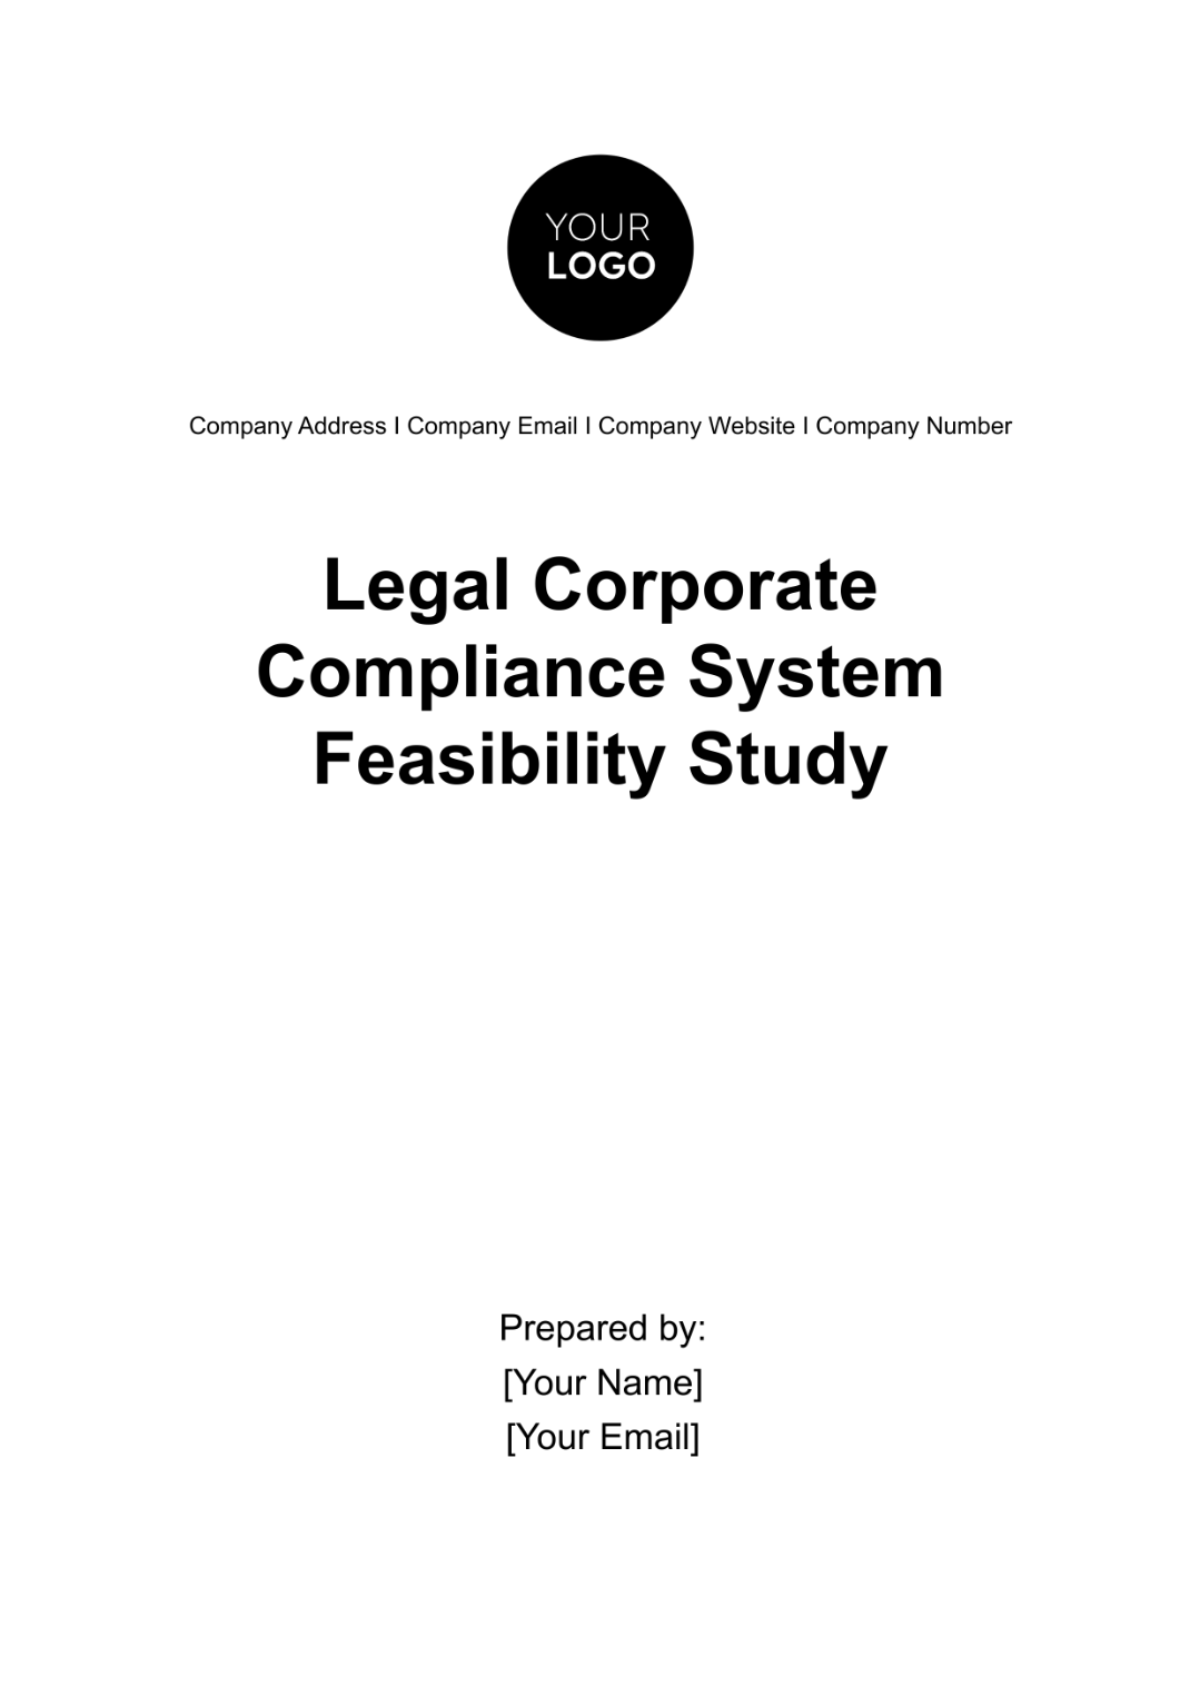 Legal Corporate Compliance System Feasibility Study Template